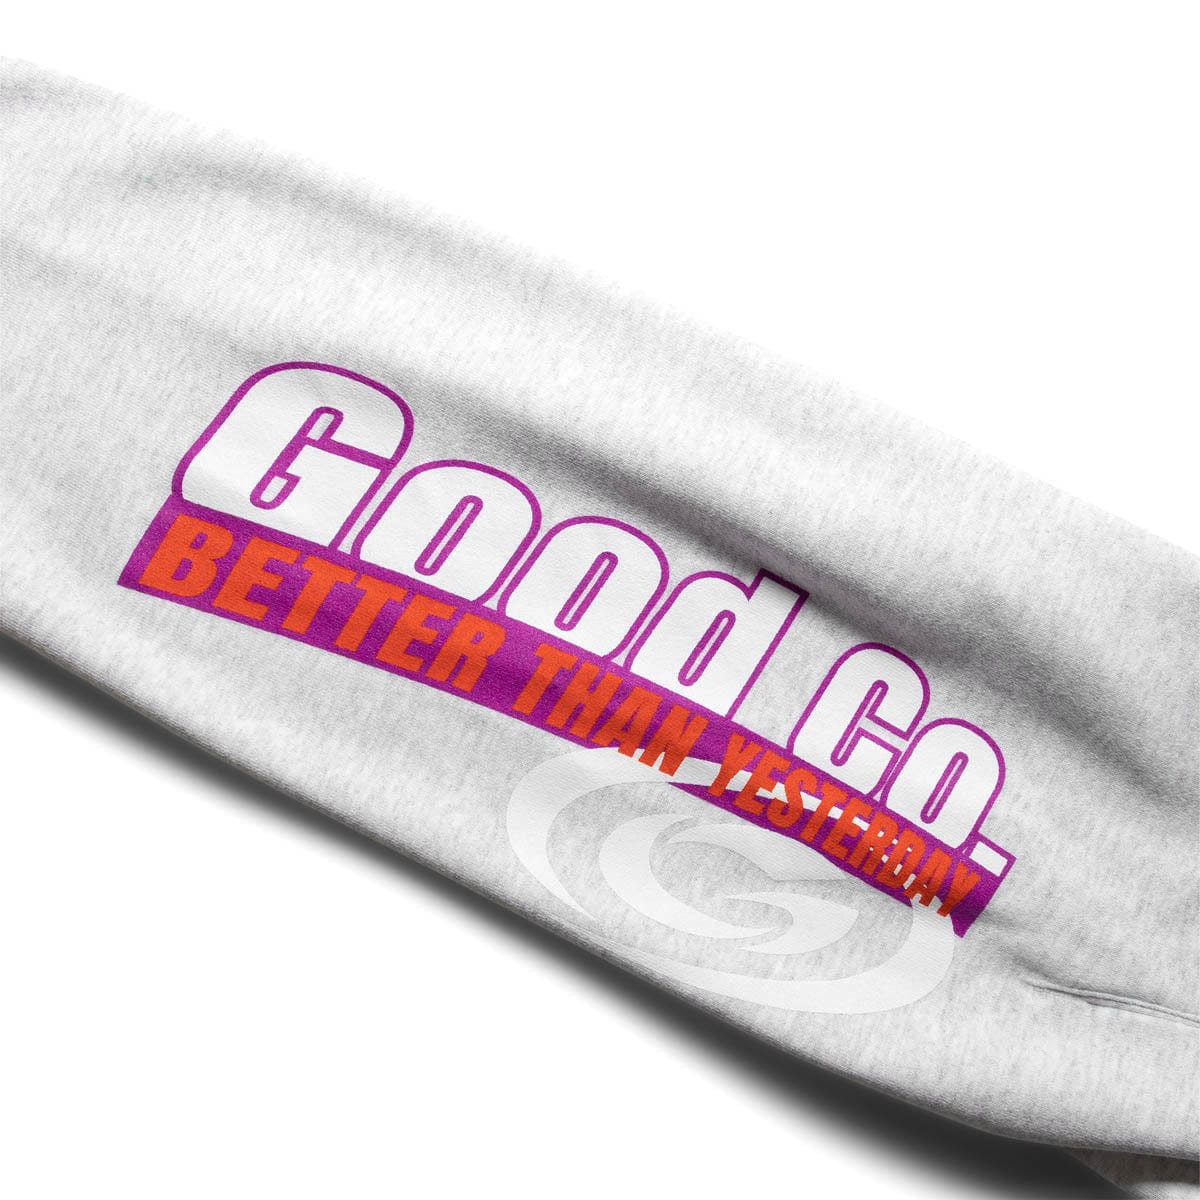 The Good Company Bottoms STAY READY SWEATPANTS